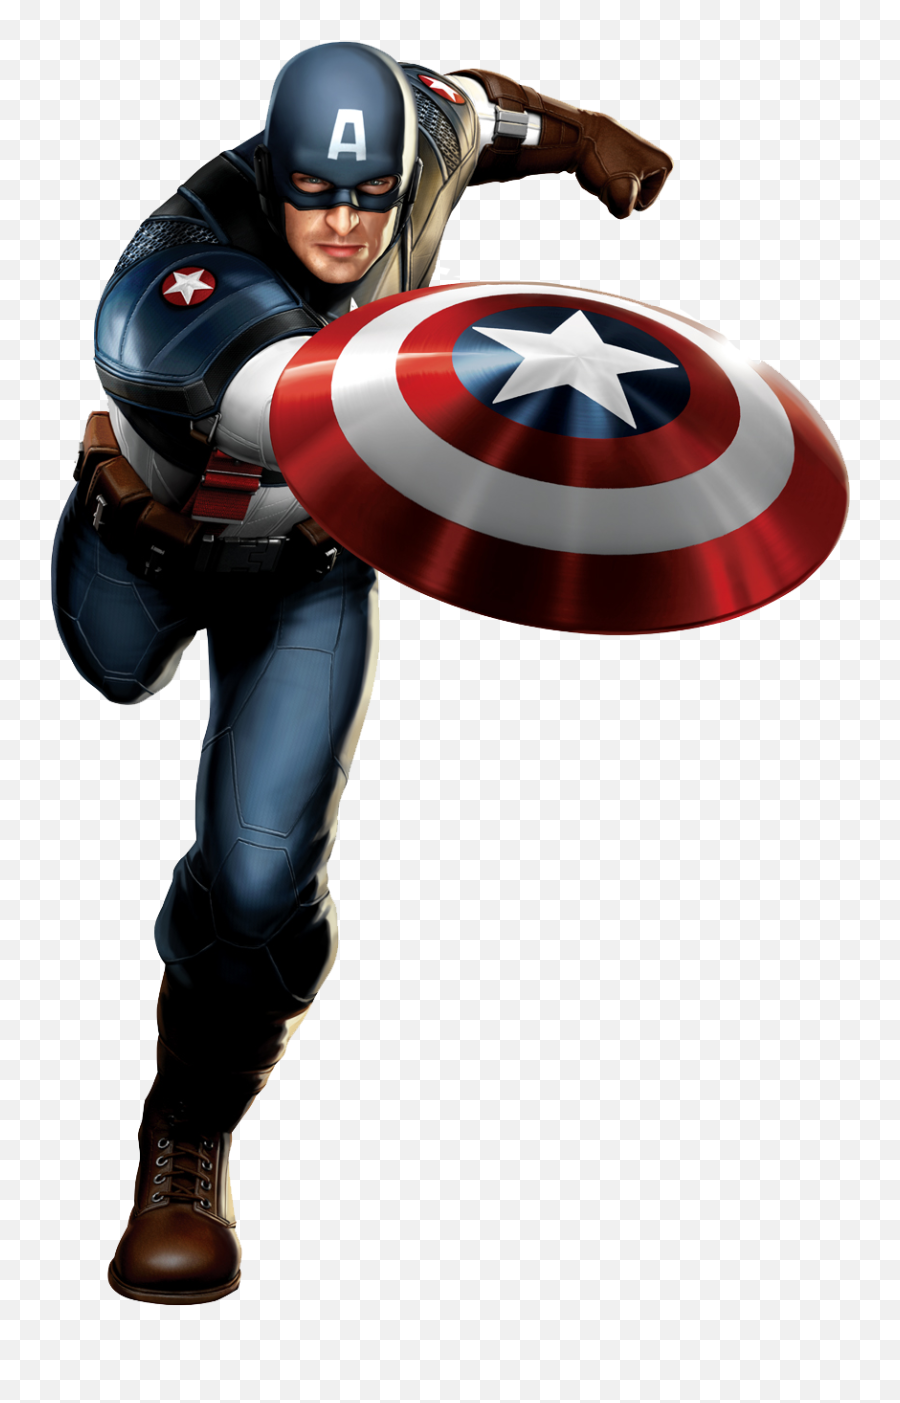 Captain America Png Images Download